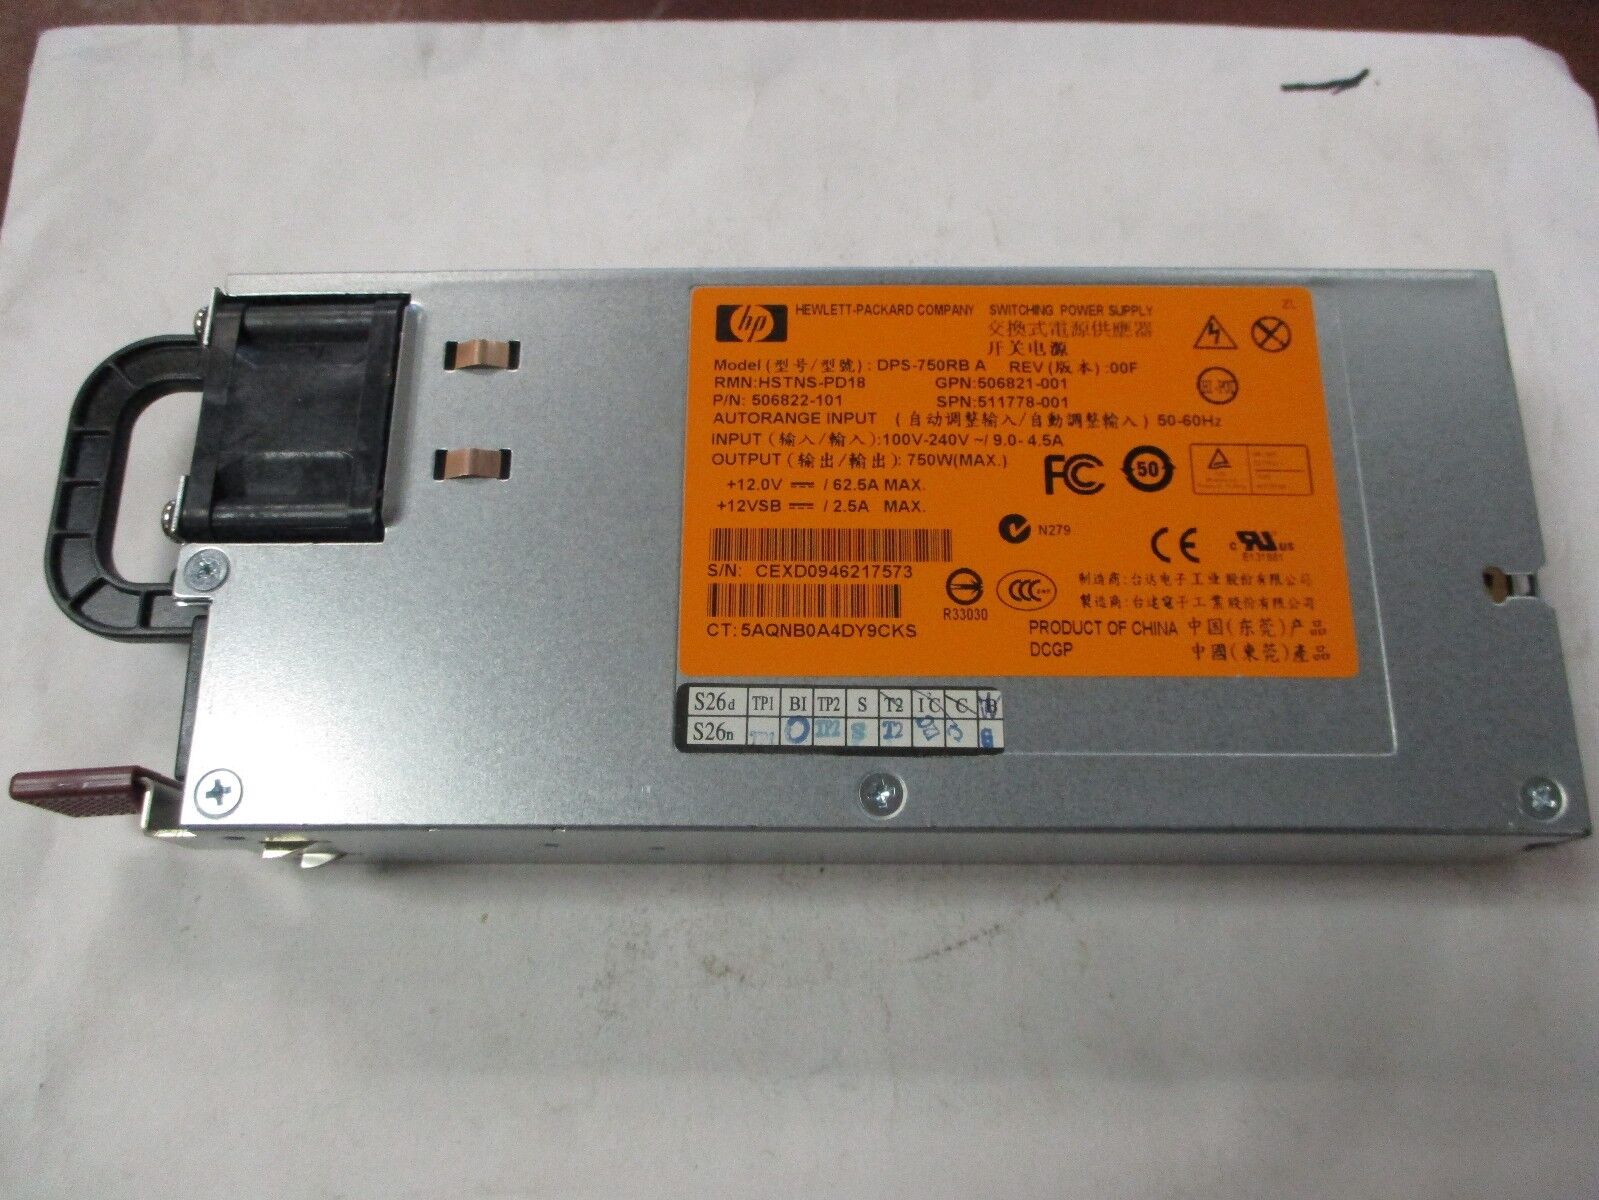 HP HSTNS-PL18 Used Proliant DL380 G6 G7 Server Power Supply